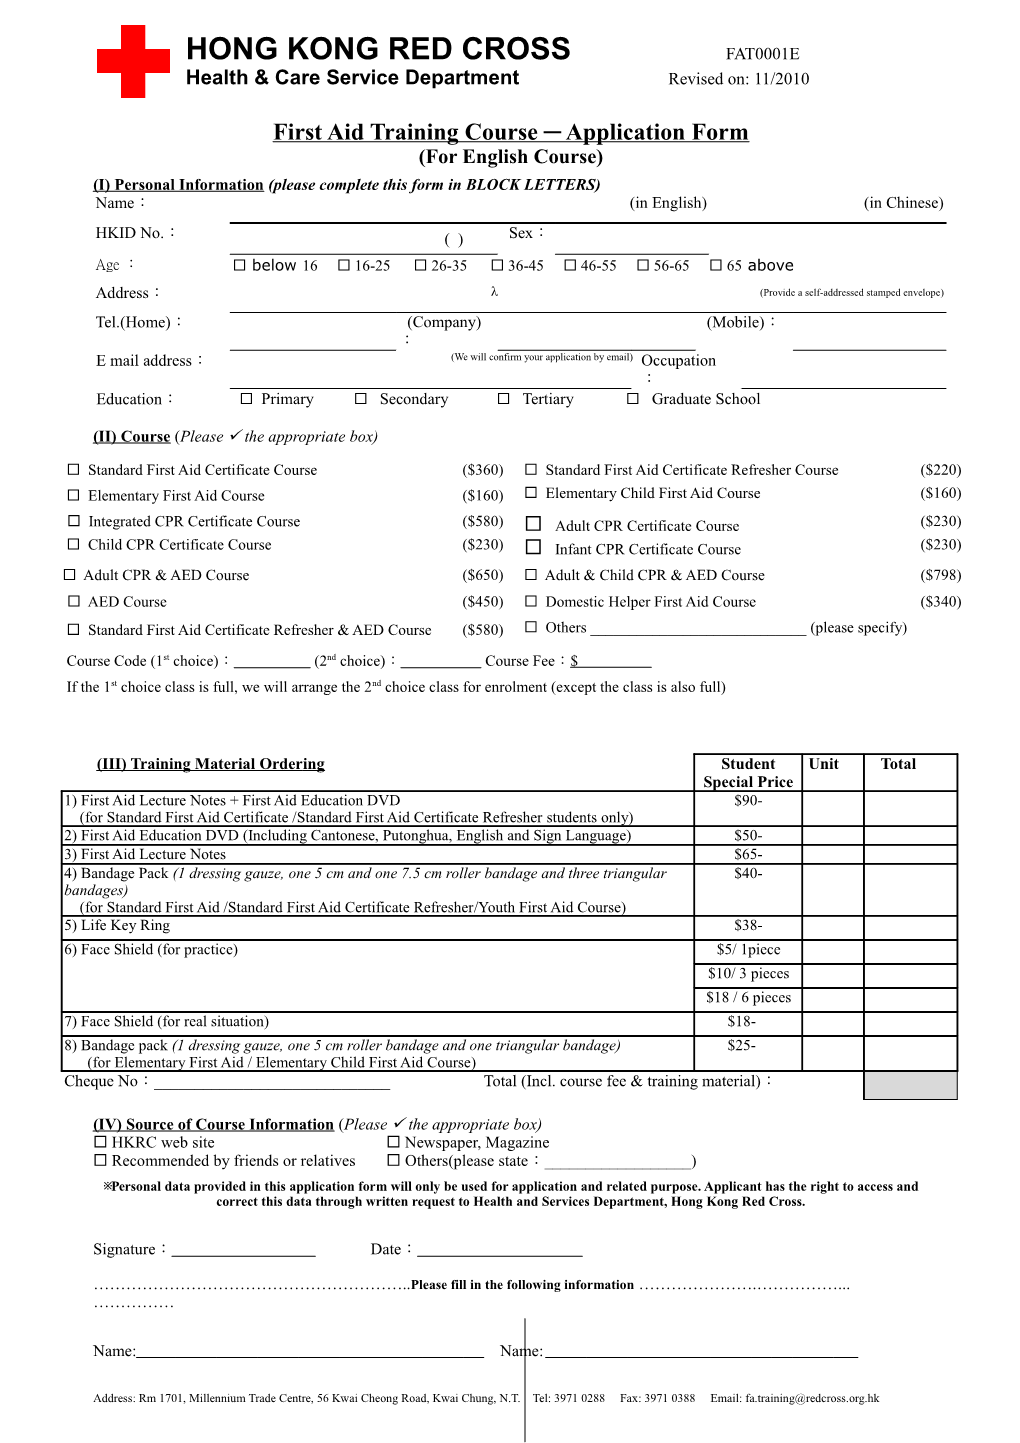 First Aid Training Course Application Form